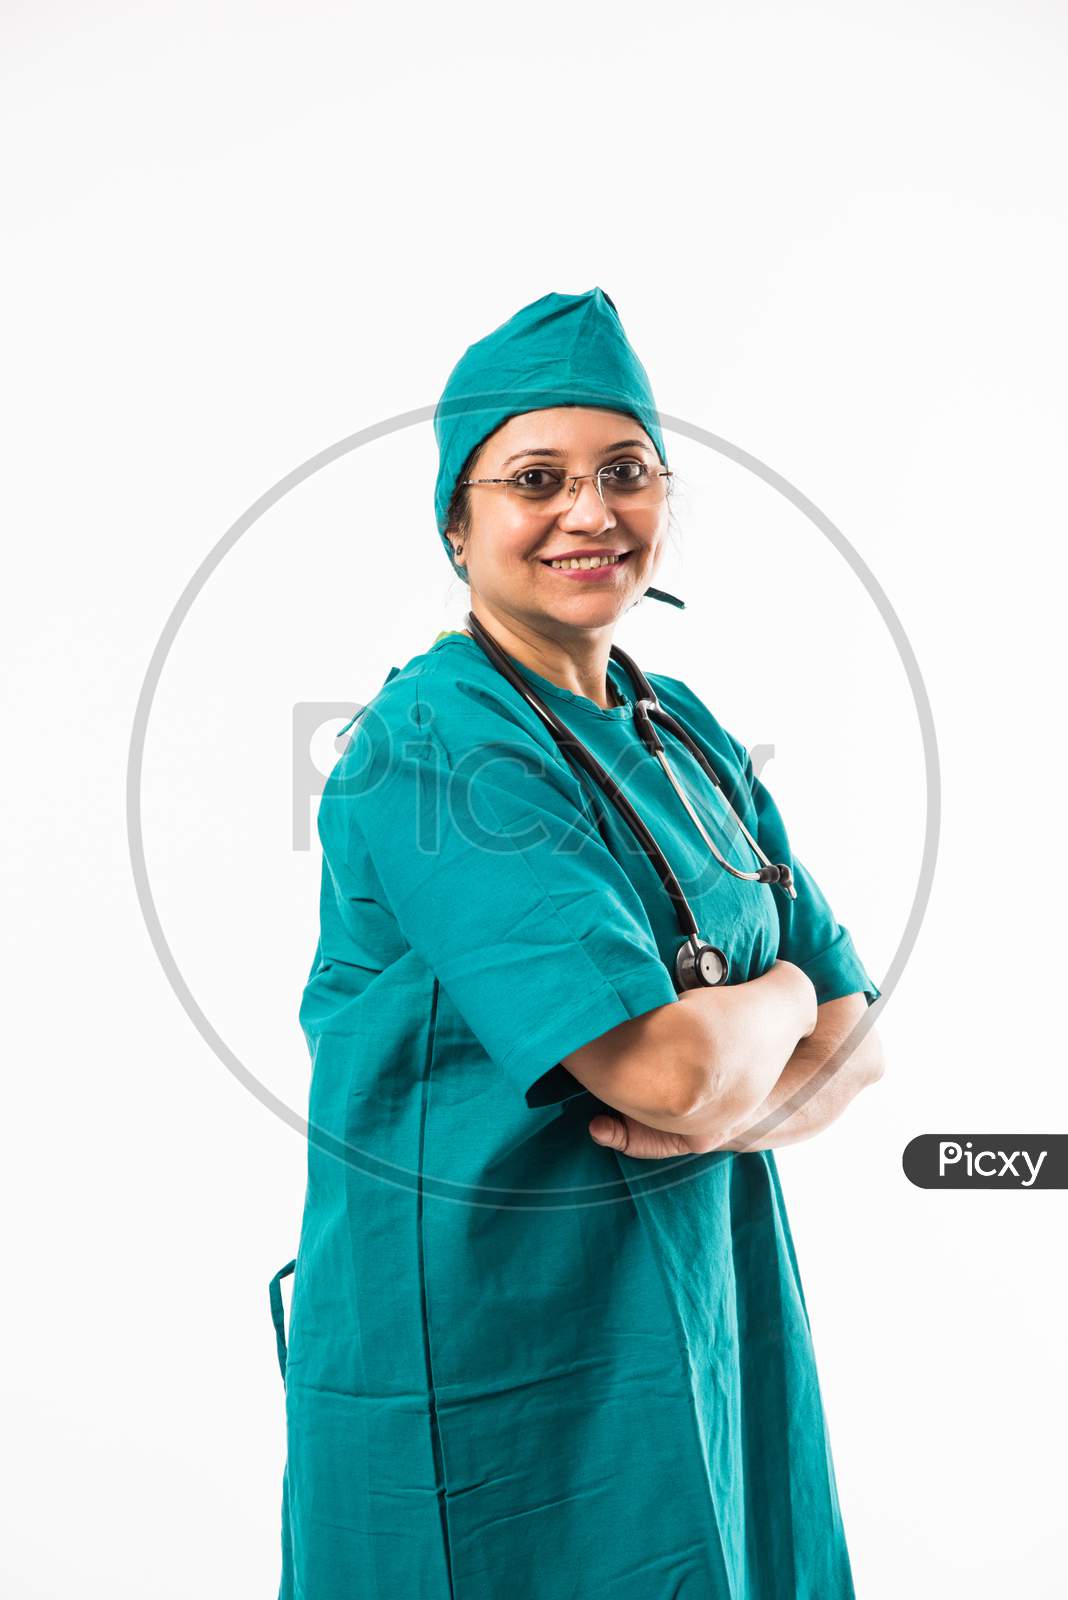 Indian Female surgeon/doctor in green dress and stethoscope